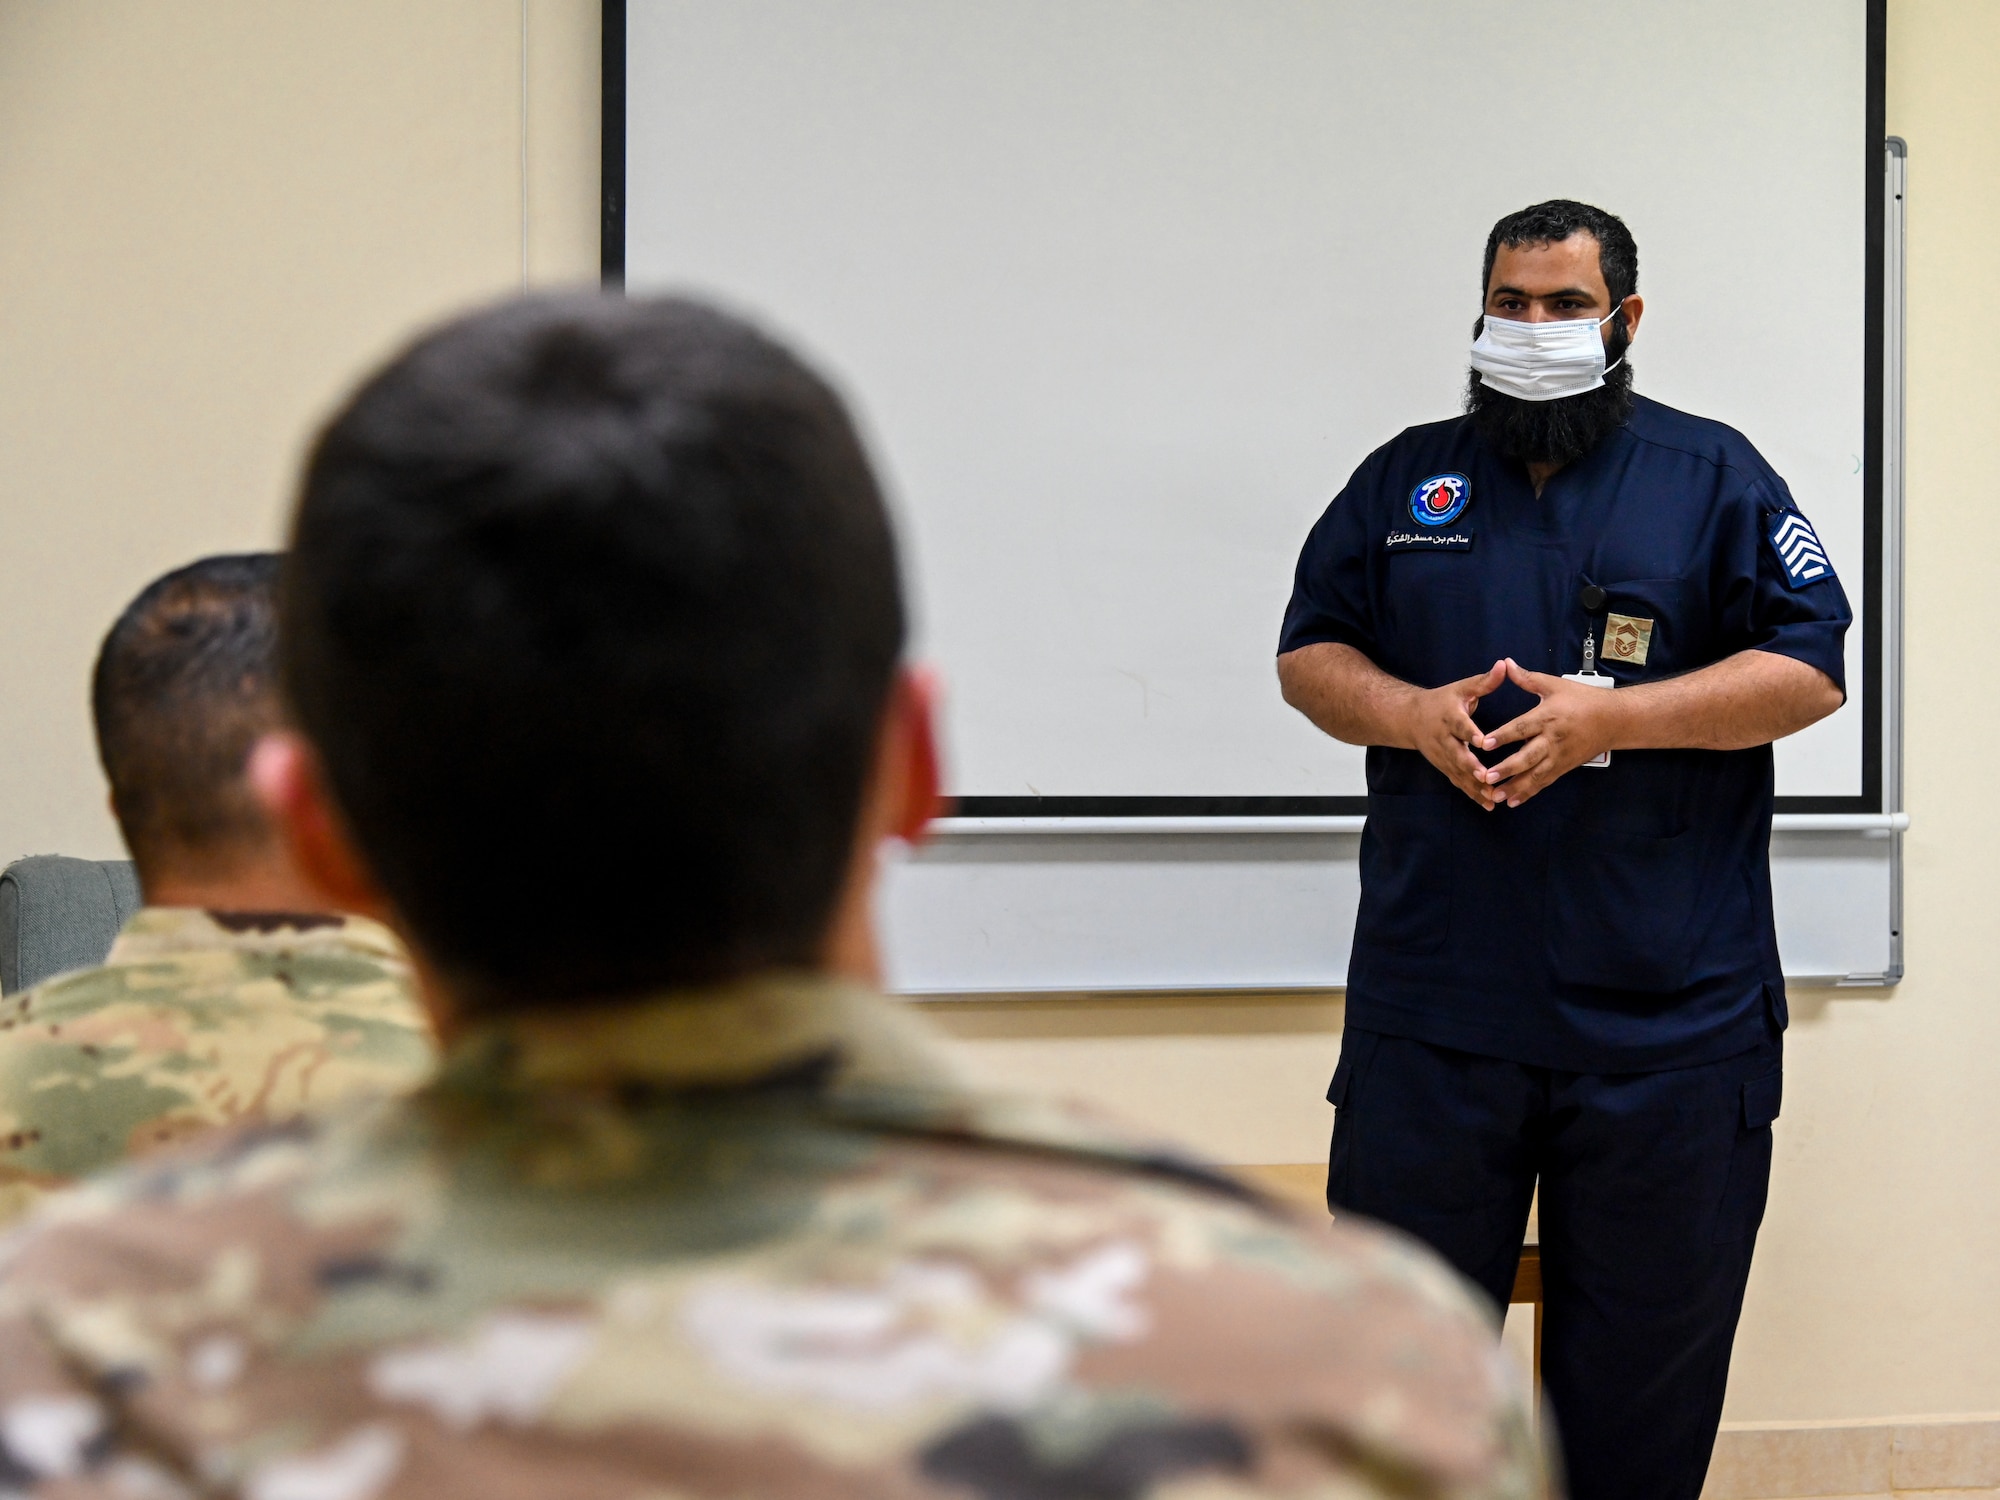 Chief Salem al Shakrh, Royal Saudi Air Force fire chief, briefs members of the 378th Expeditionary Civil Engineer Squadron fire department during an integrated training at Prince Sultan Air Base, Kingdom of Saudi Arabia, Nov. 24, 2021. The briefing allowed members of the 378 ECES to gain a better understanding of the role that the RSAF fire department plays within the mission of the 378th Air Expeditionary Wing. (U.S. Air Force photo by Staff Sgt. Christina Graves)